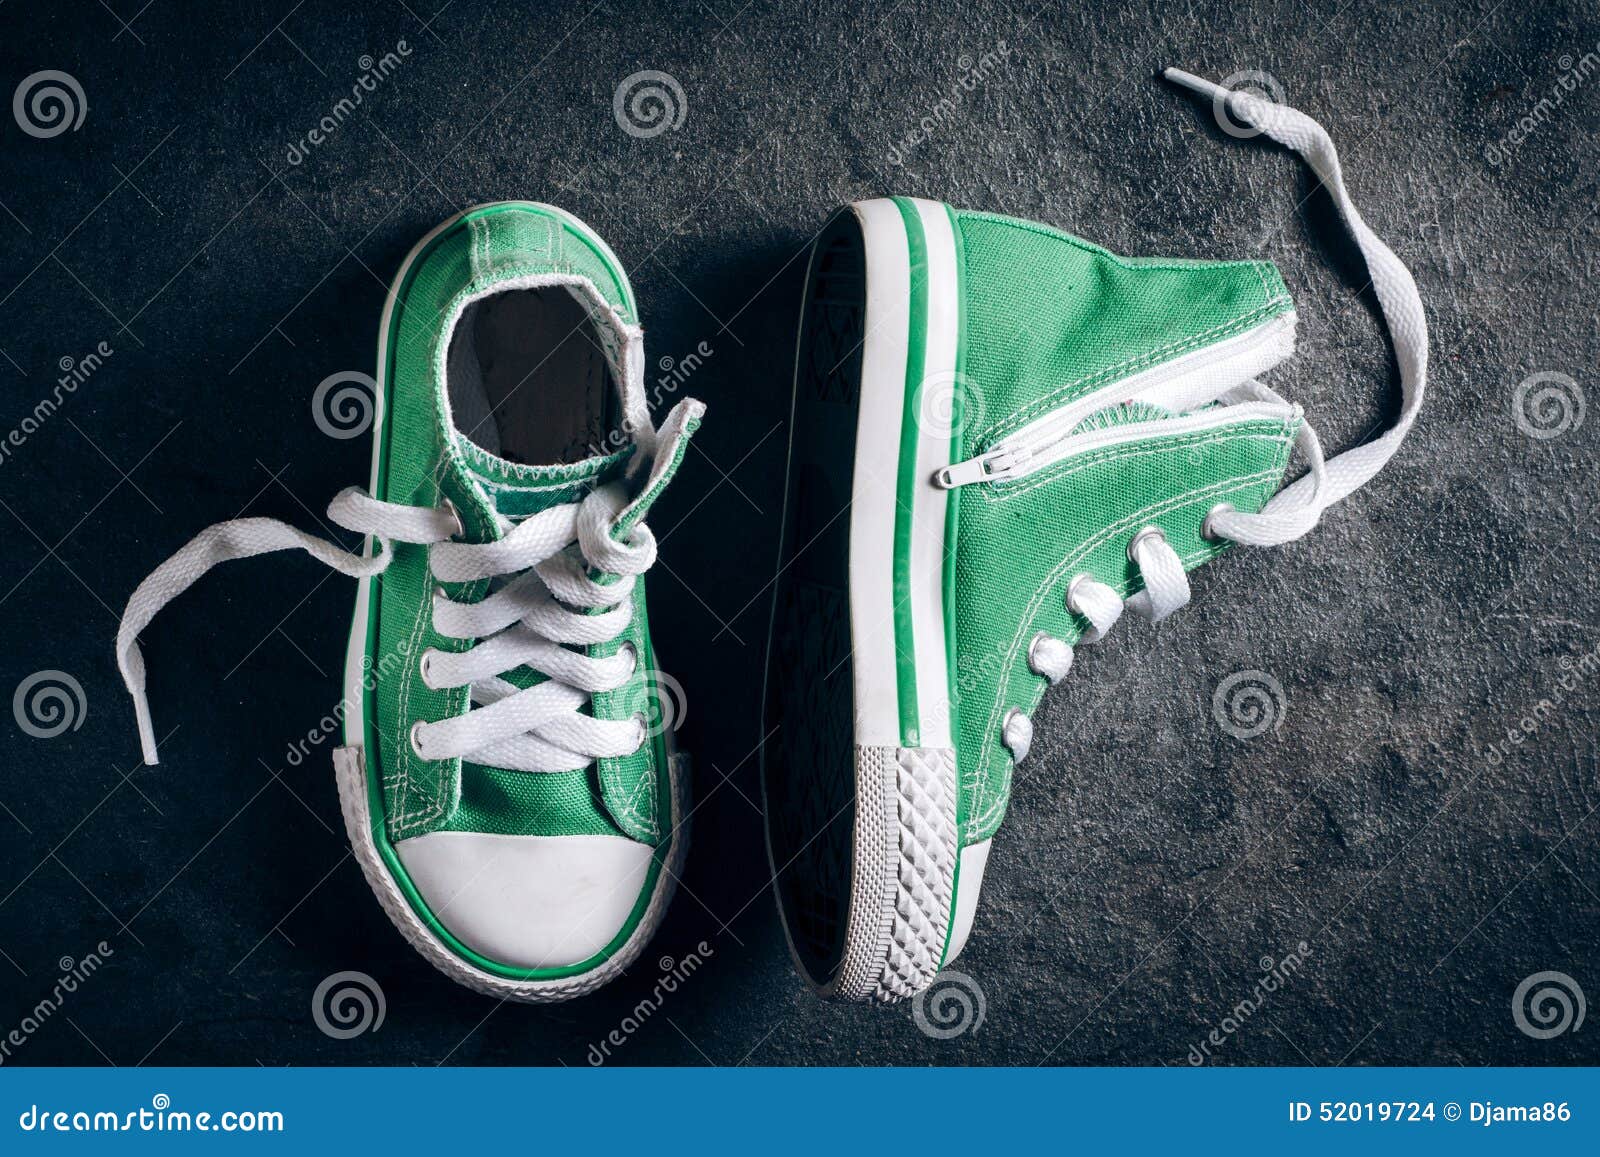 Pair of sneakers stock photo. Image of fashioned, classic - 52019724